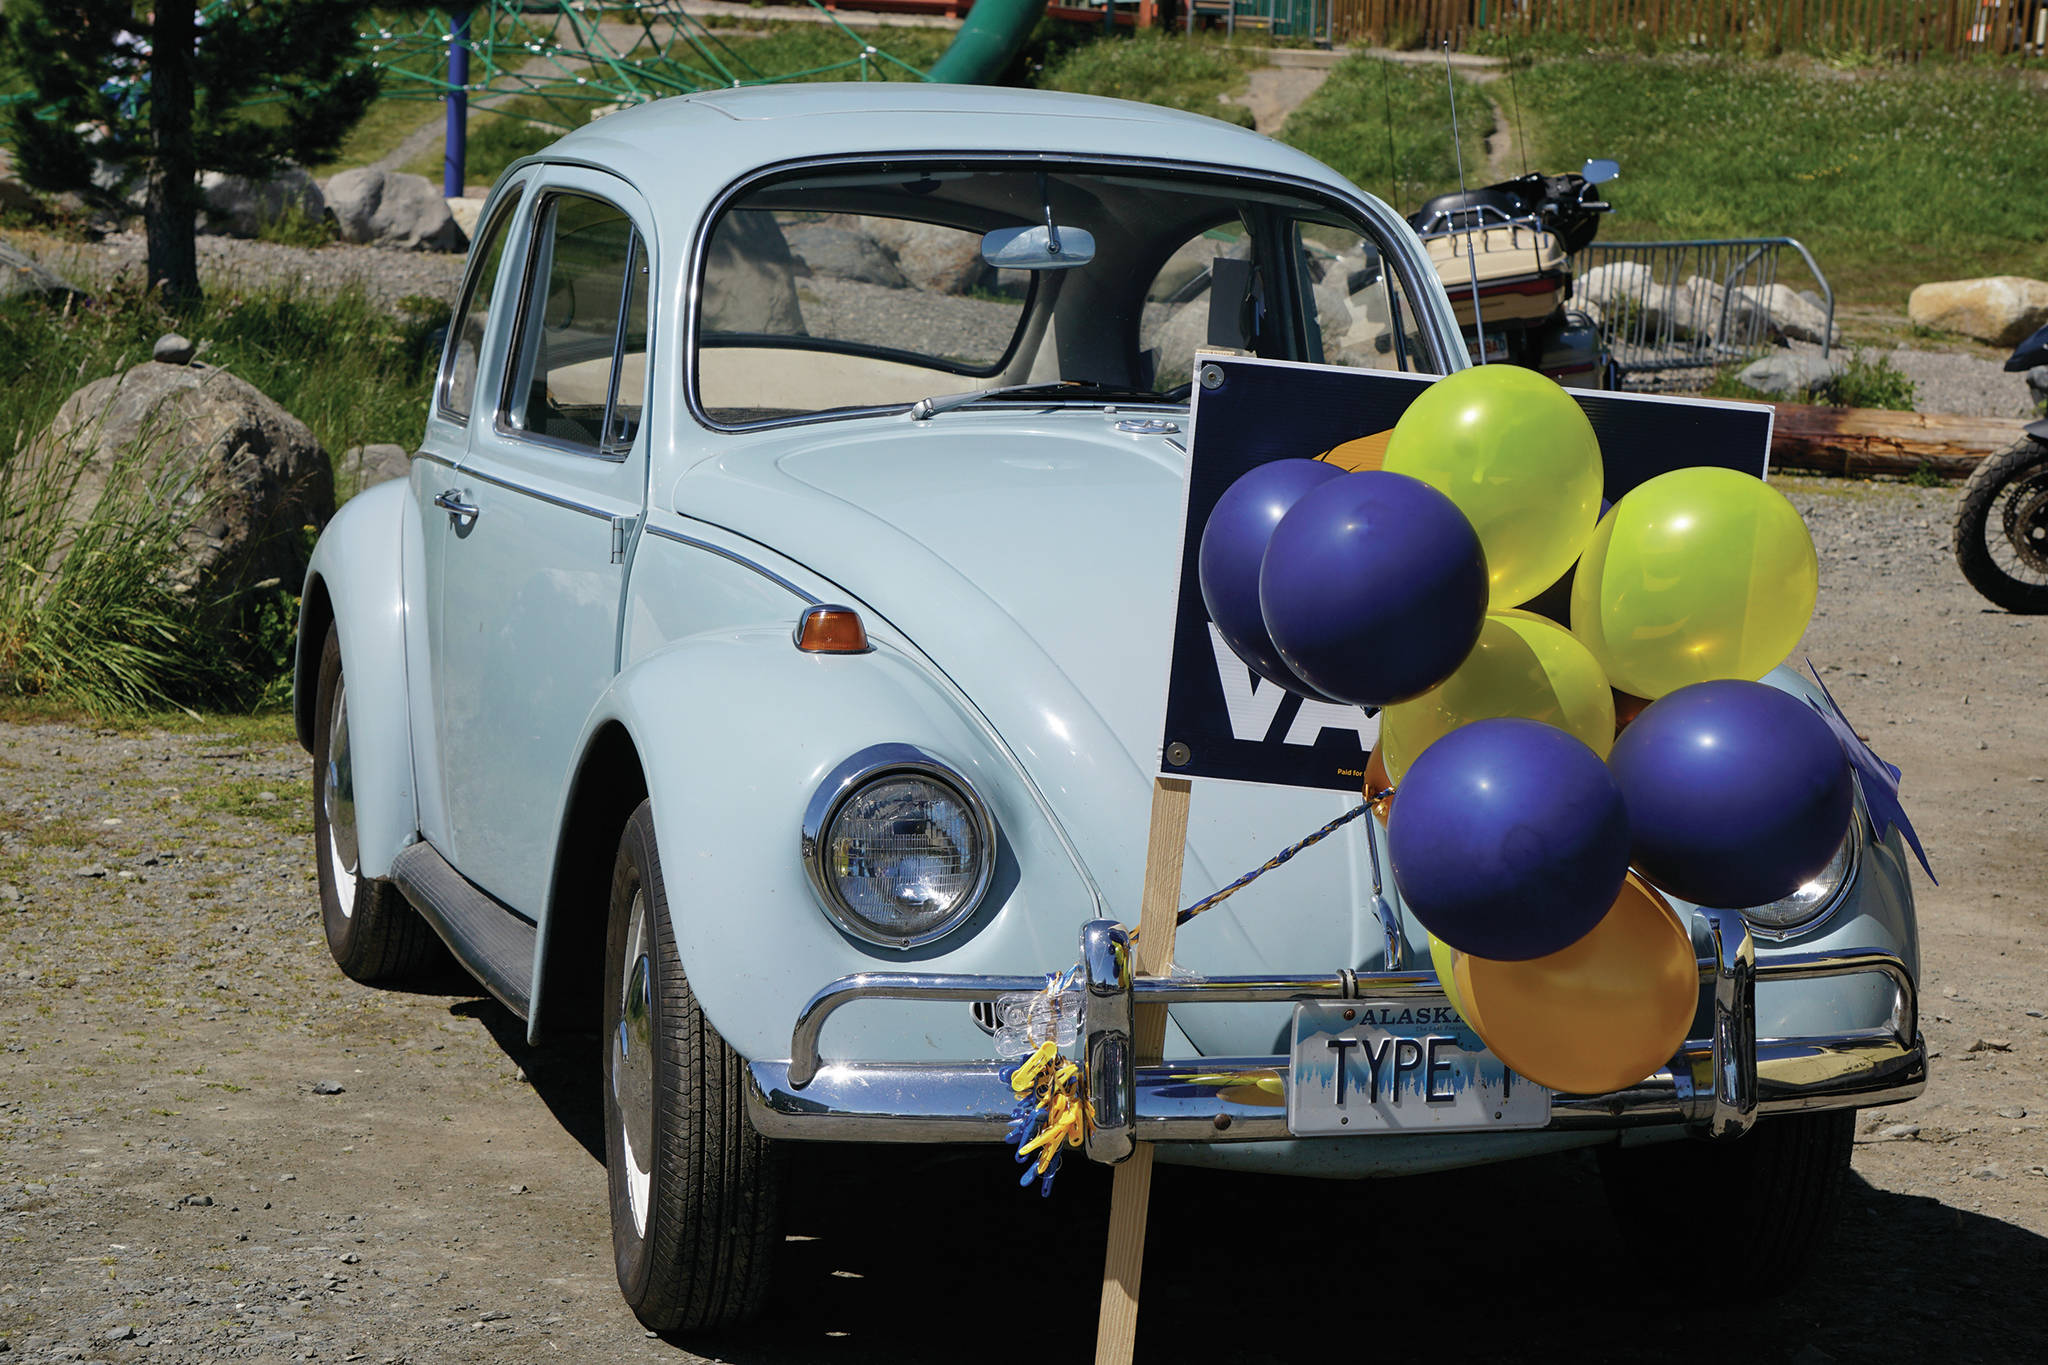 Eileen Becker’s 1967 Type 1 Volkswagen Beetle holds a “Vote Vance” yard sign at a campaign rally for Rep. Sarah Vance, R-Homer, on Sunday, June 14, 2020, at Karen Hornaday Park in Homer, Alaska. (Photo by Michael Armstrong/Homer News)